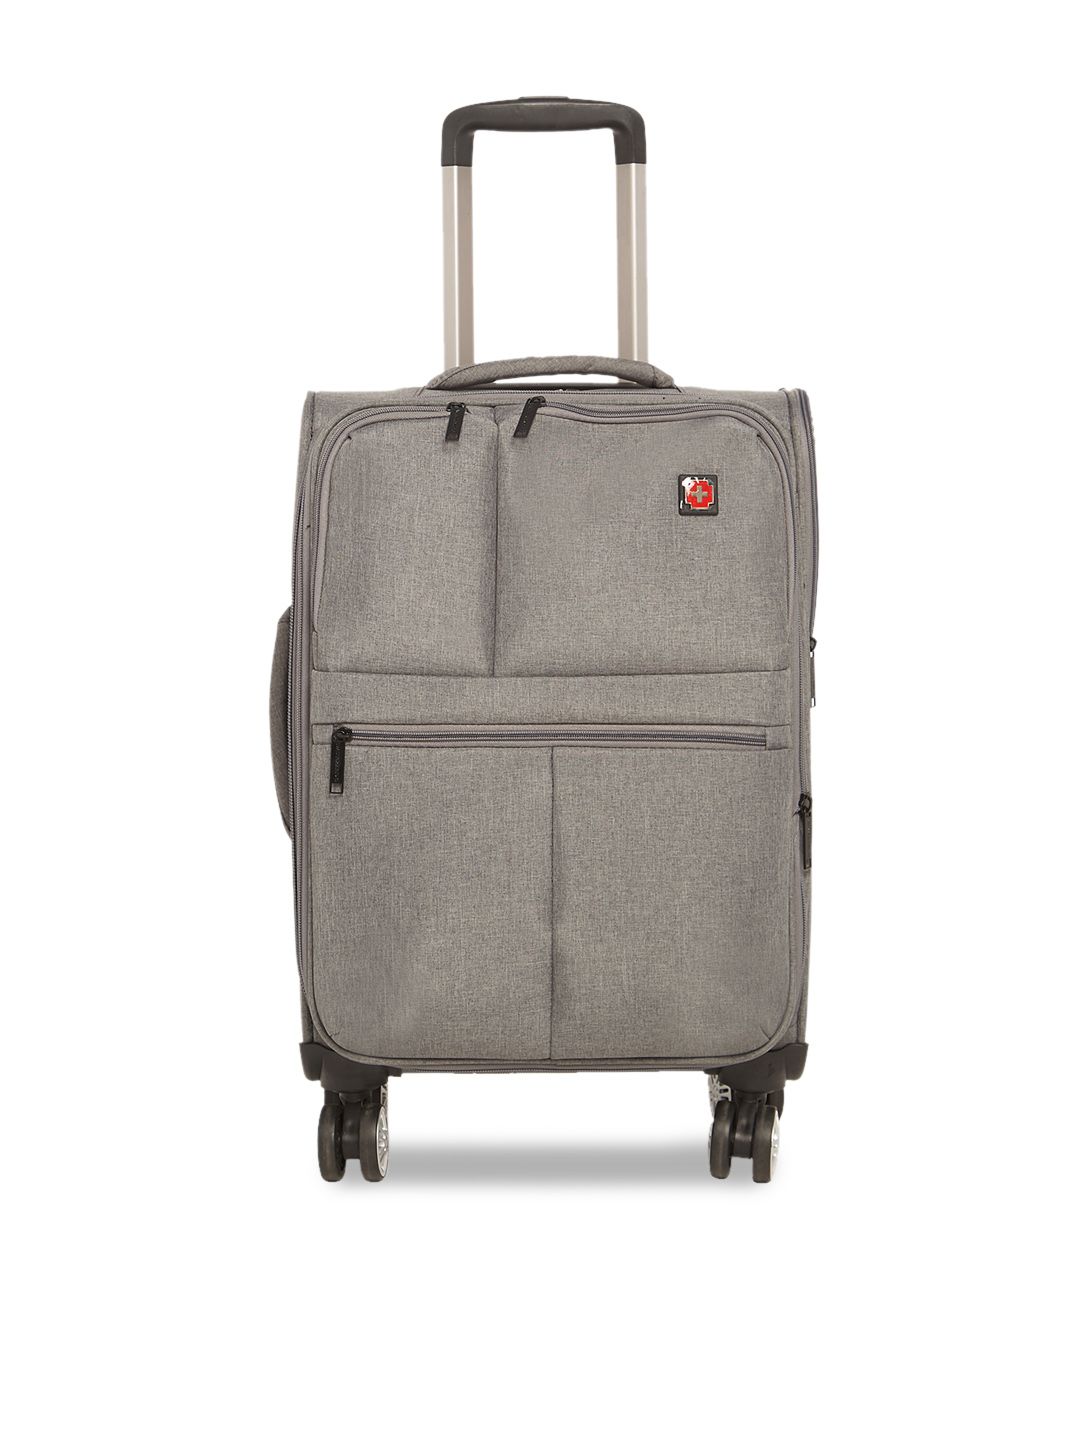 SWISS BRAND Grey Solid Vevey 360-Degree Rotation Soft-Sided Cabin Trolley Suitcase Price in India